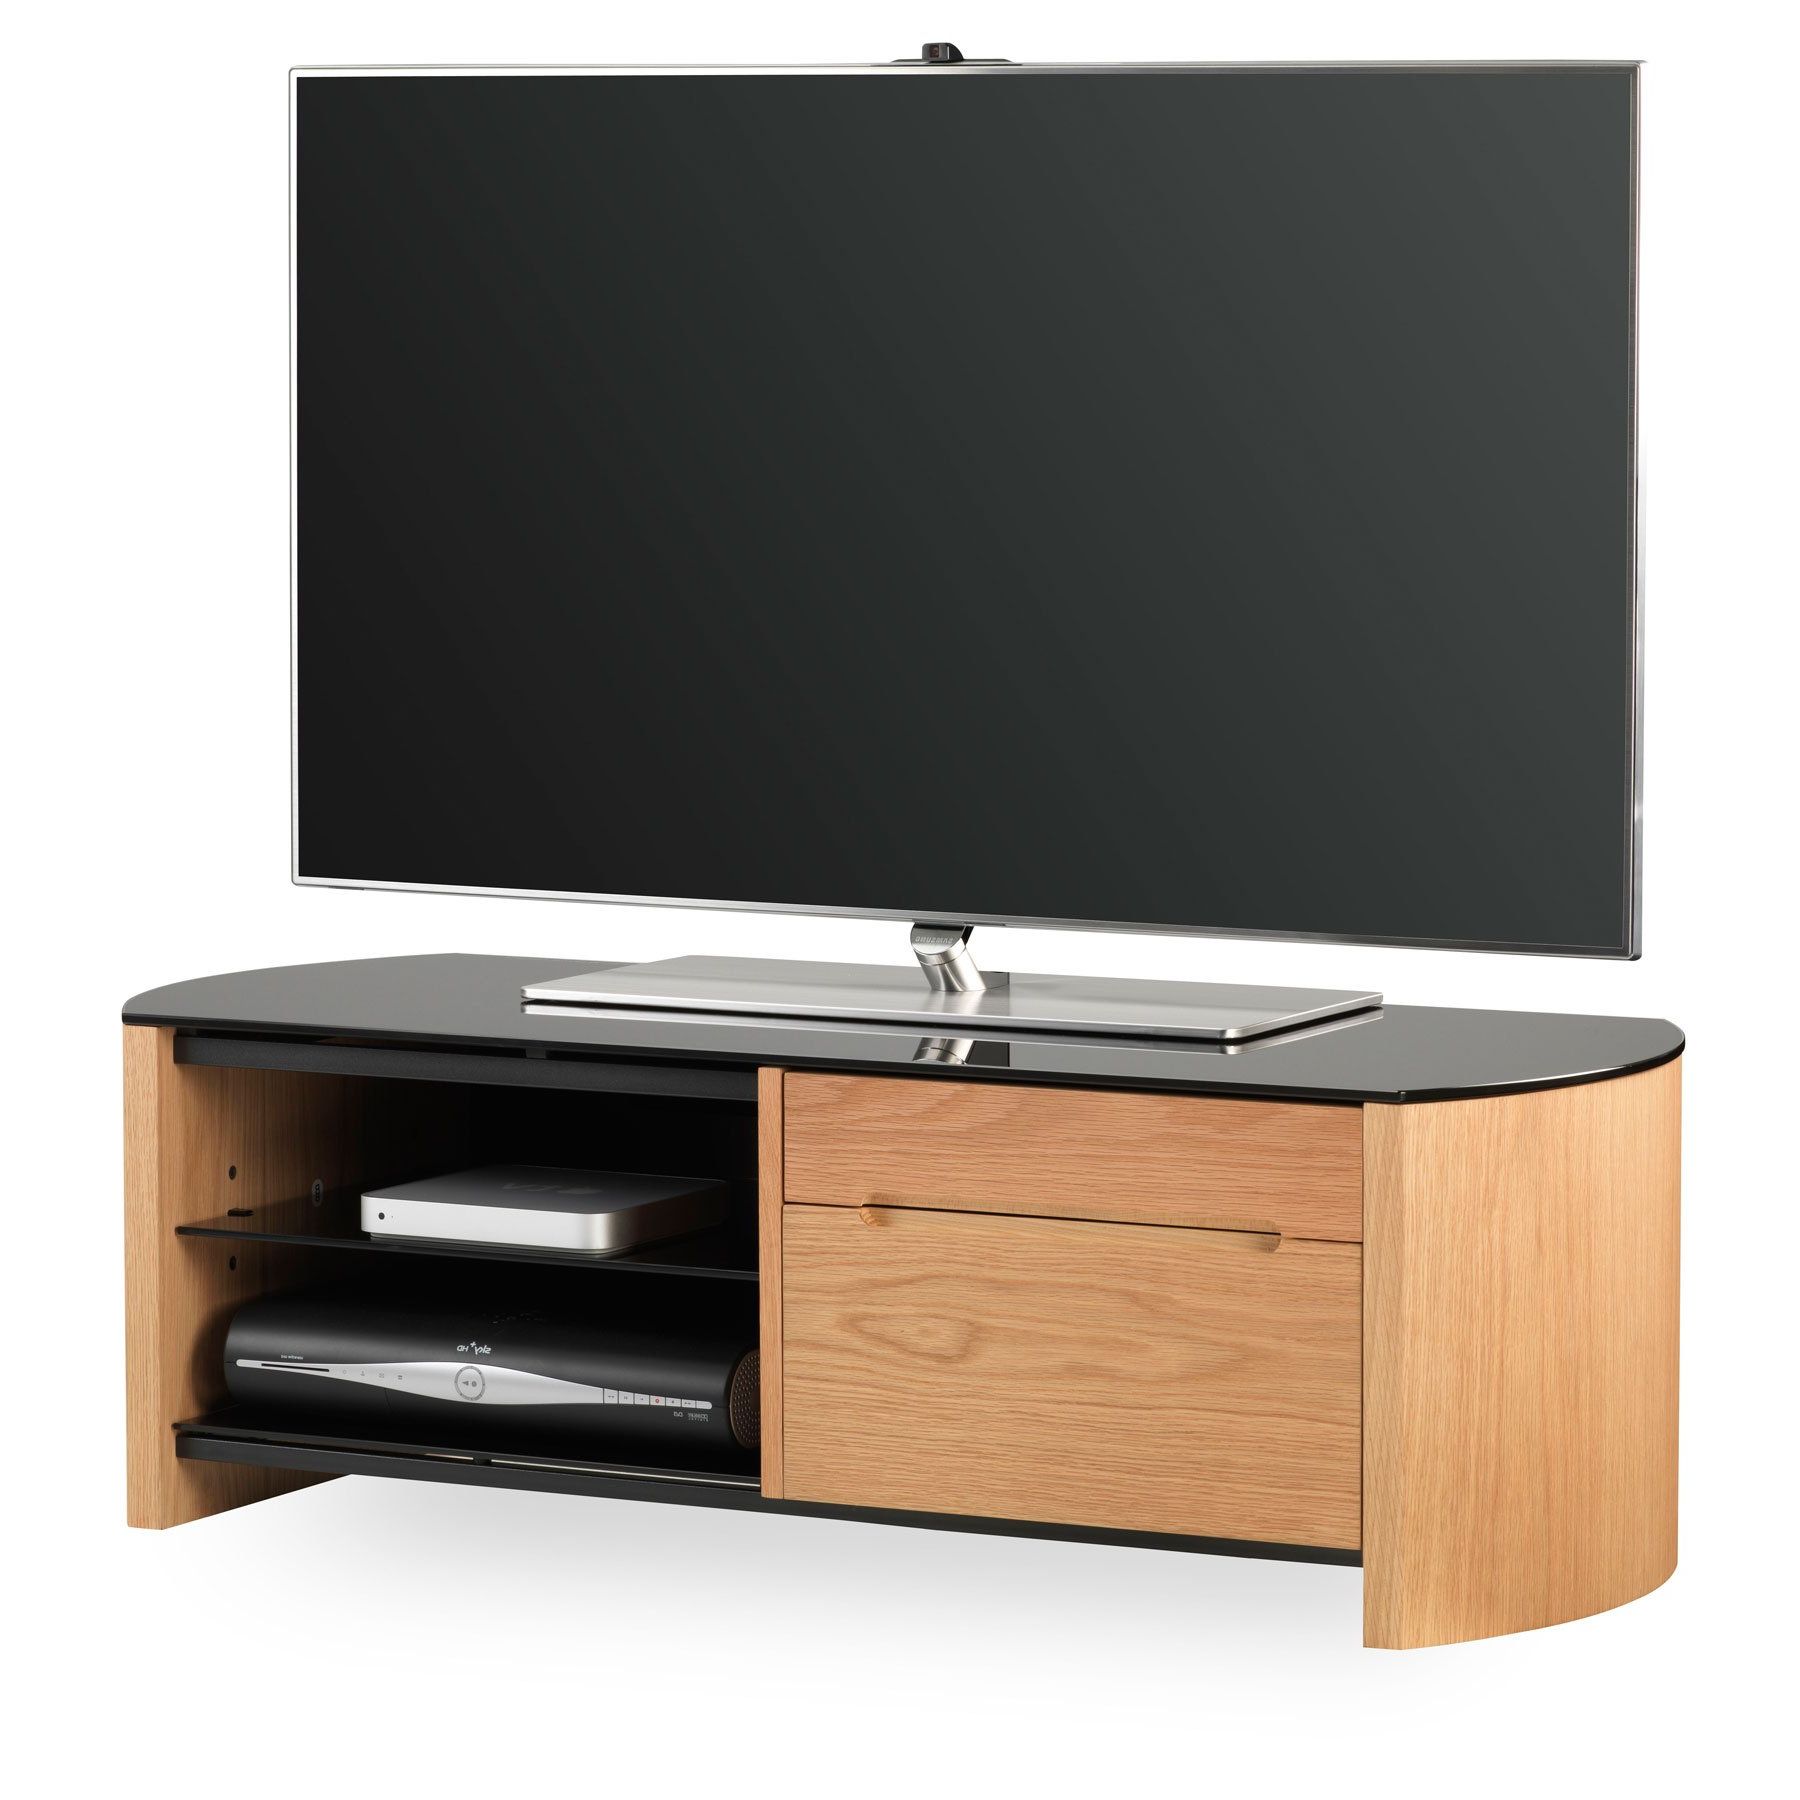 Alphason Finewood Fw1100cb Light Oak Tv Stand For Up To 50 In Colleen Tv Stands For Tvs Up To 50" (View 6 of 20)